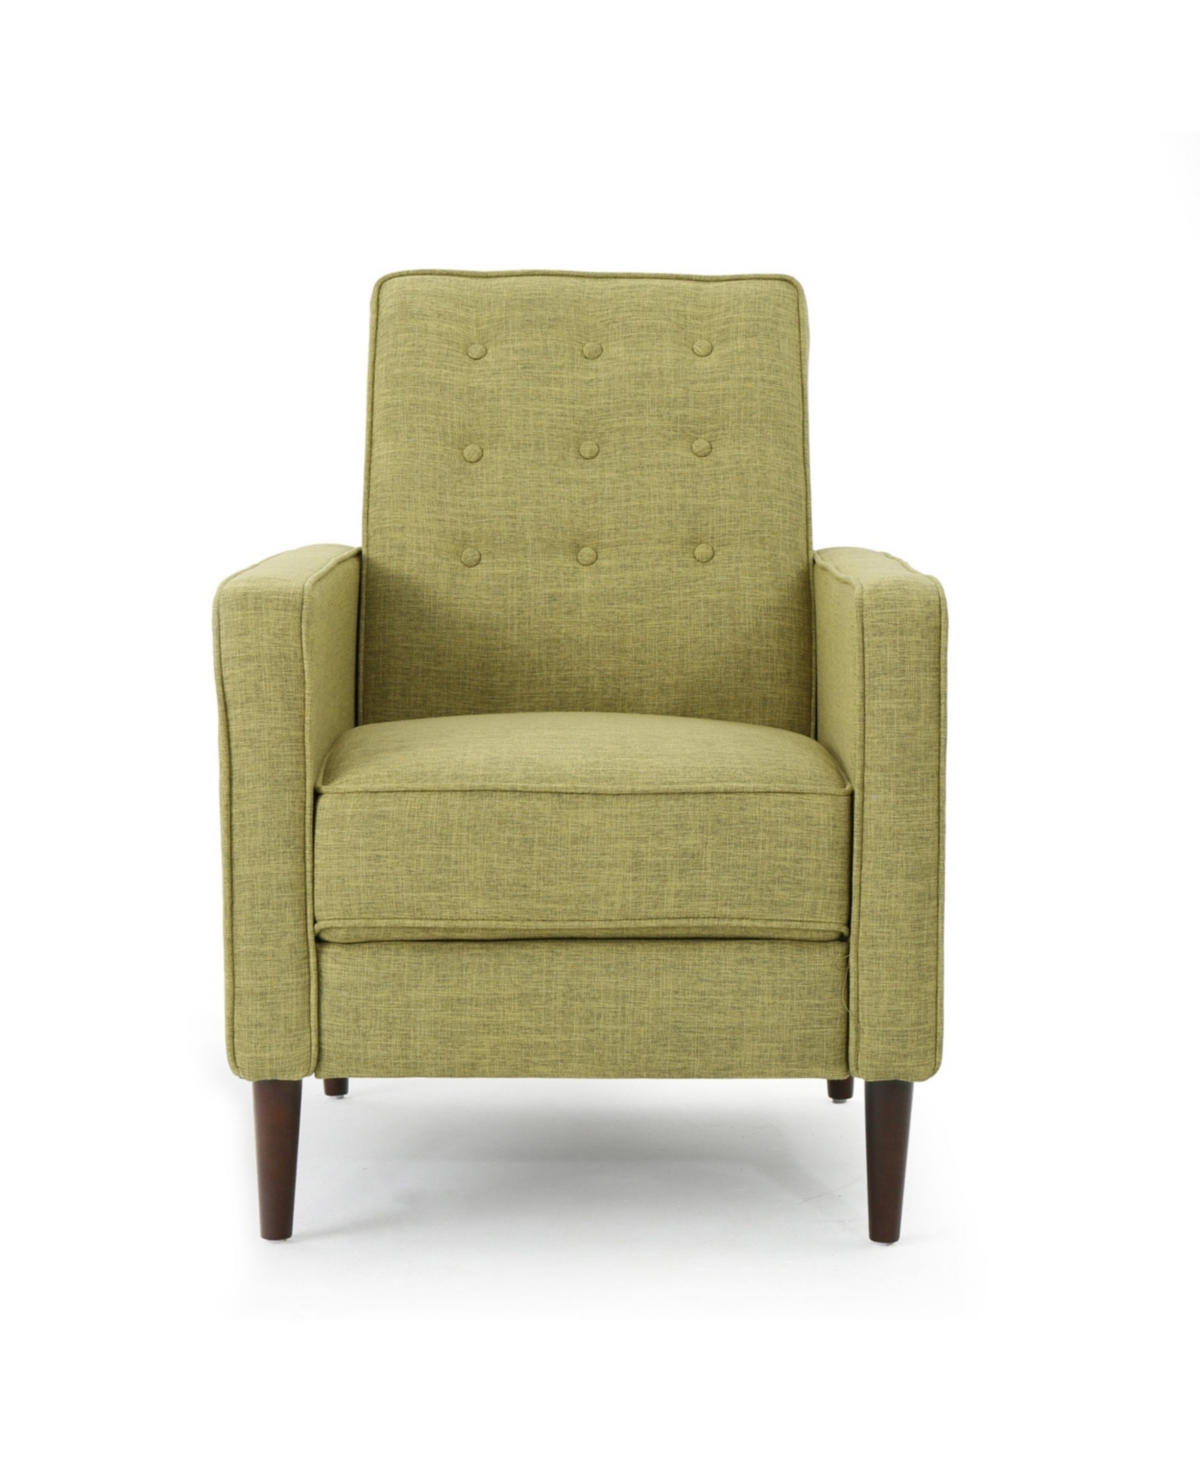 Noble House Mervynn Mid-century Modern Button Tufted Recliner In Muted Green